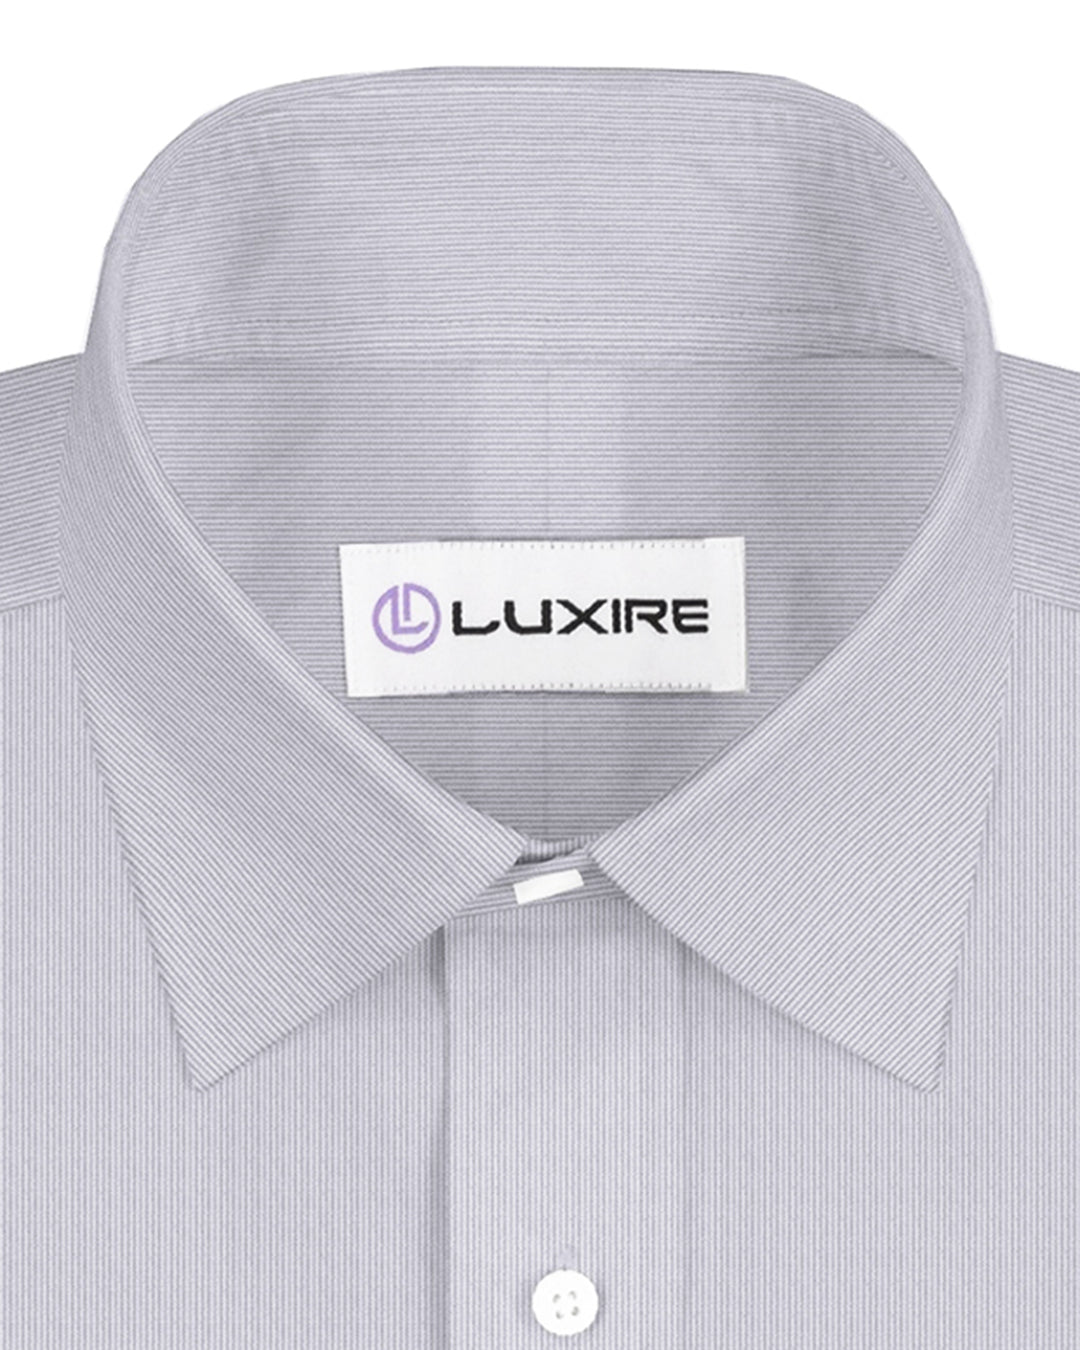 Collar of the custom linen shirt for men in white with grey stripes by Luxire Clothing